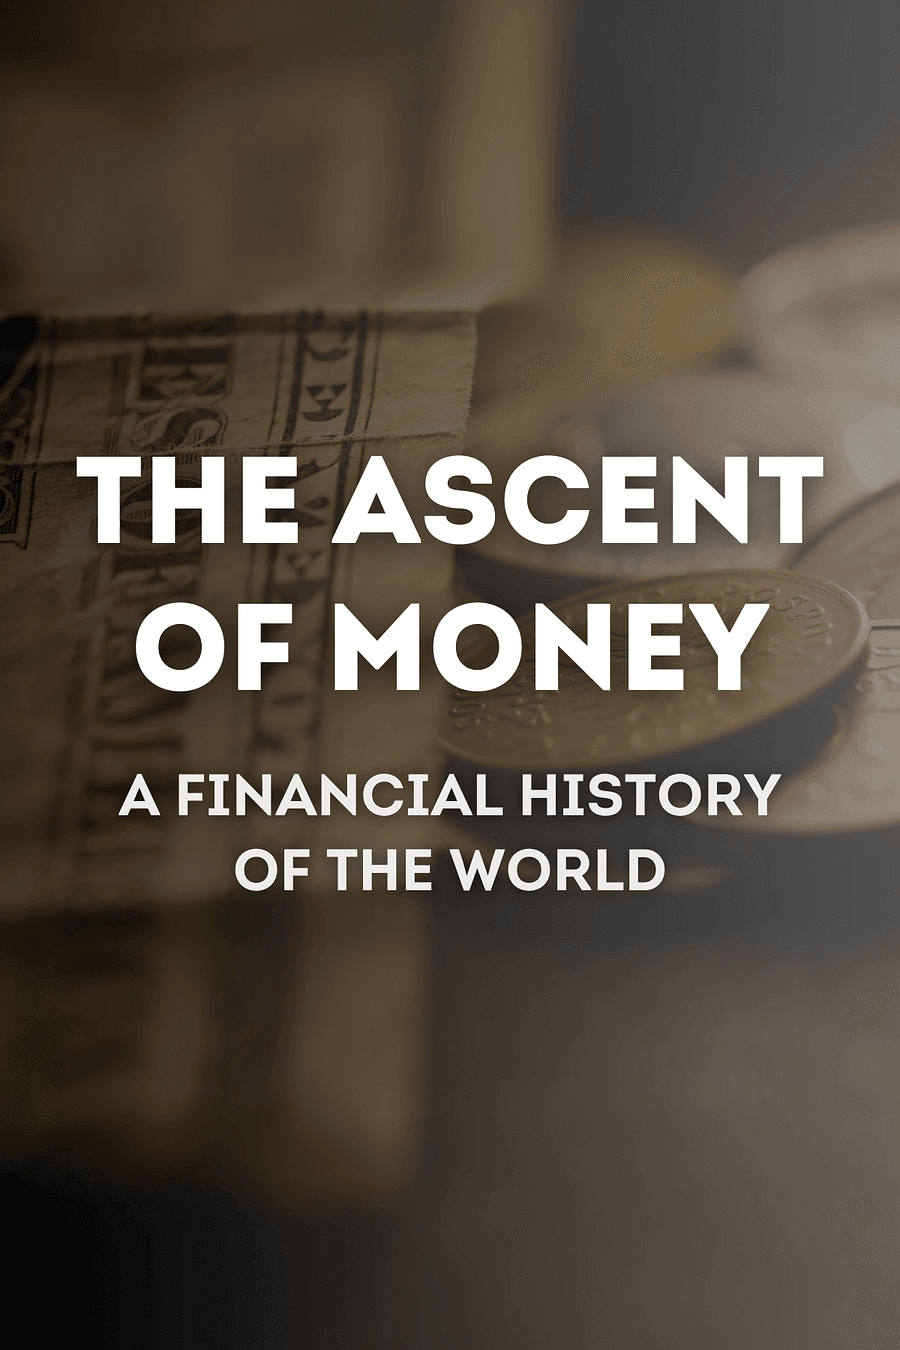 The Ascent of Money by Niall Ferguson - Book Summary